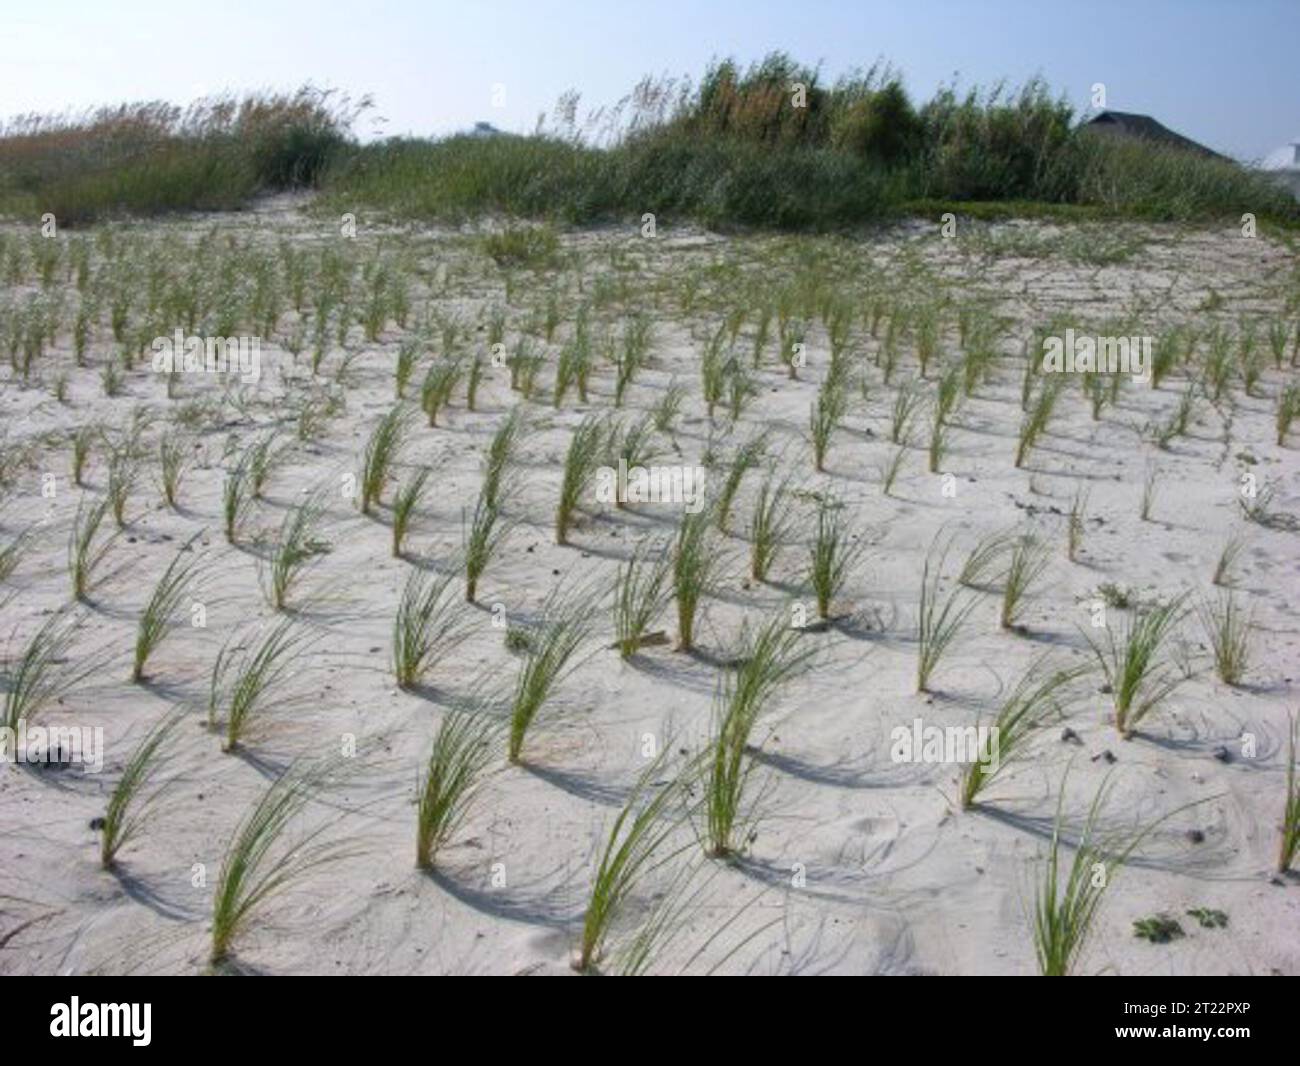 Spartina grass planted in rows to help with beach erosion. Subjects: Aquatic environments; Aquatic plants; Banks; Conifers; Environments (Natural); Foliage; Forests; Marine environments; Scenics; Trees; Vegetation; Wildlife refuges. Location: Alabama. Fish and Wildlife Service Site: BON SECOUR NATIONAL WILDLIFE REFUGE. Stock Photo